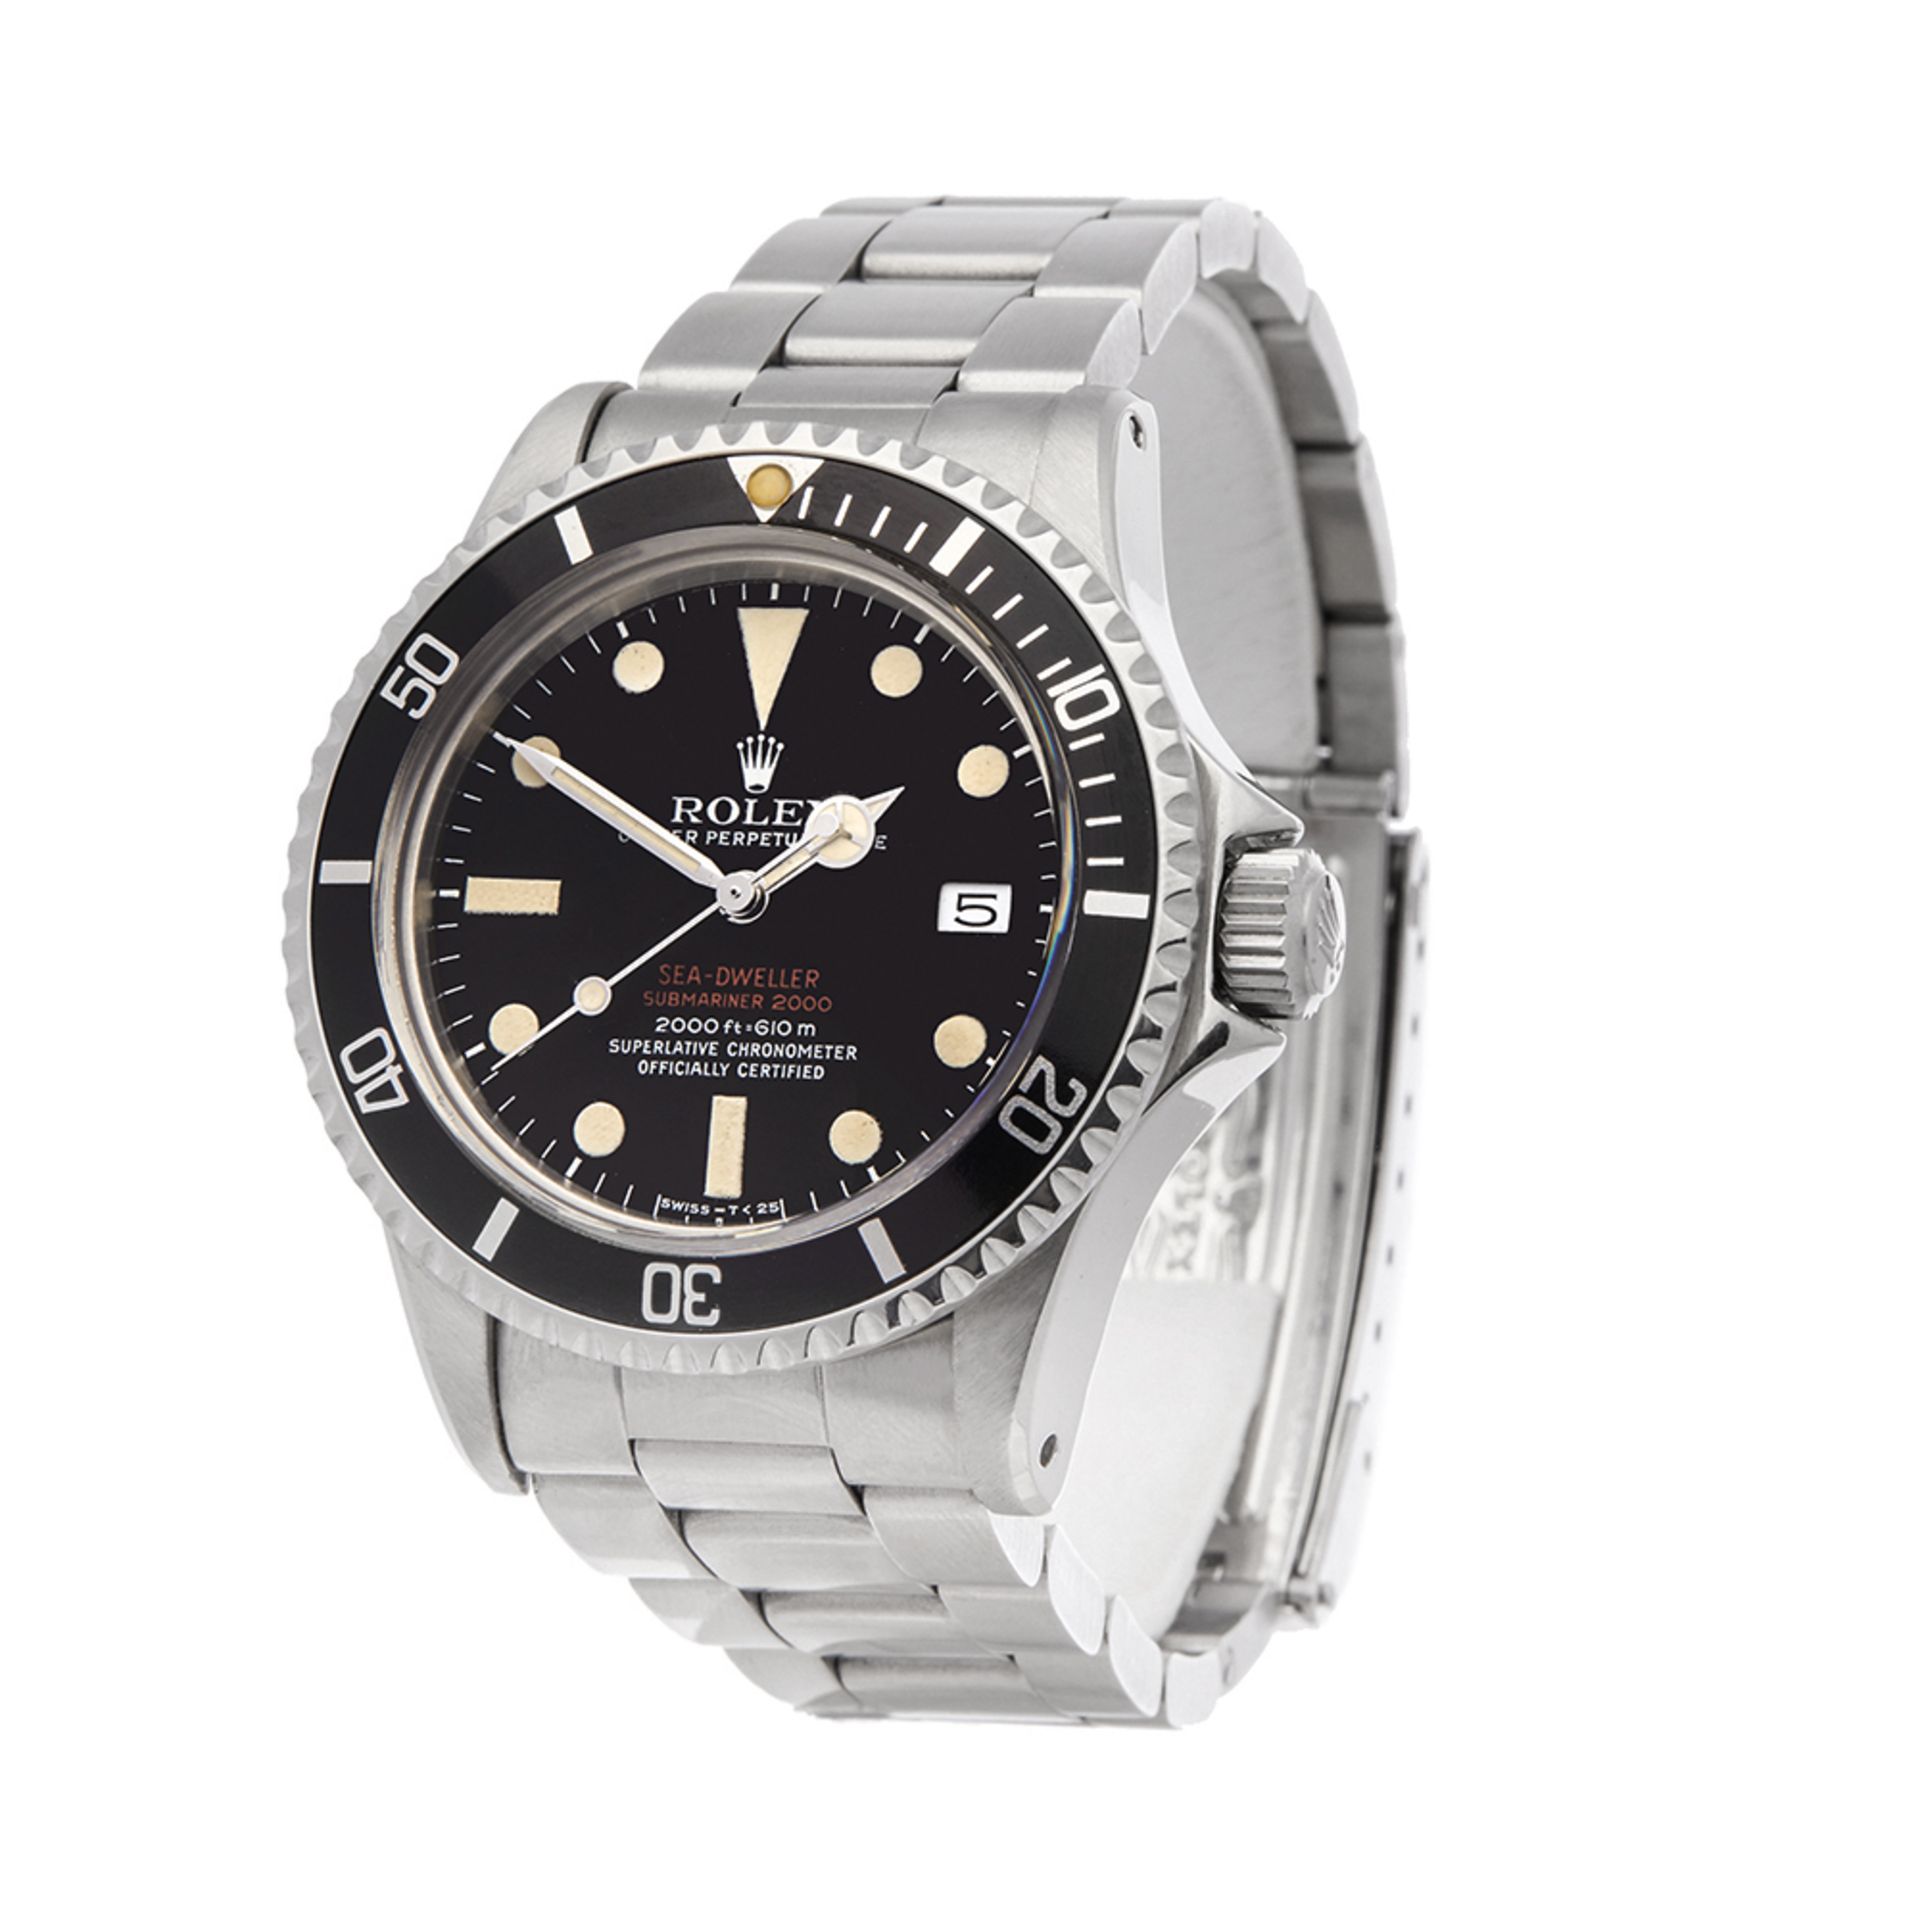 Rolex Sea-Dweller Double Red Drsd Stainless Steel - 1665